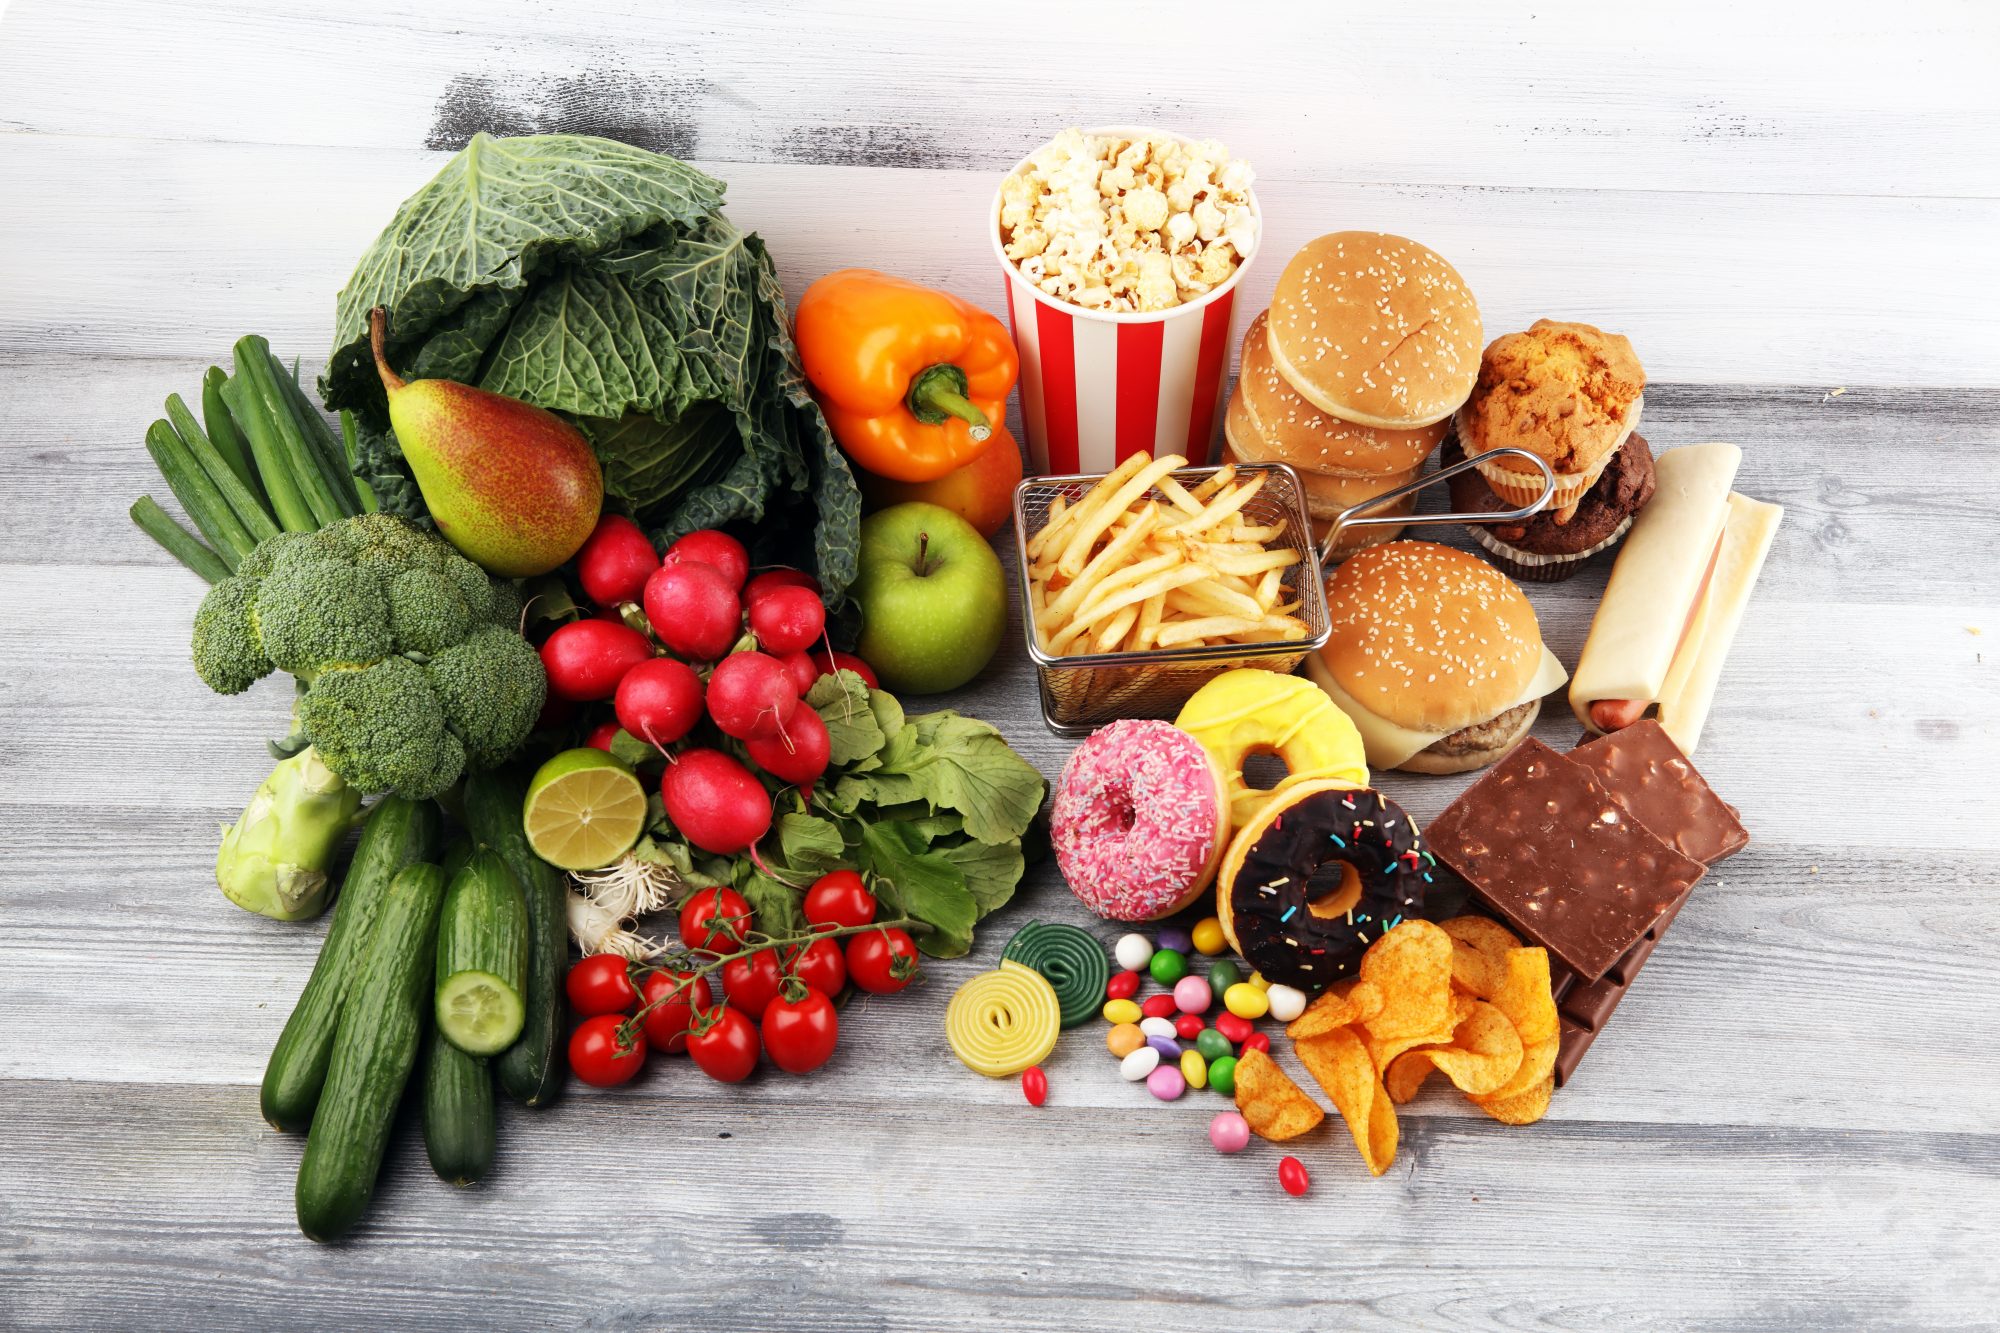 Healthy or unhealthy food. Concept photo of healthy and unhealthy food. Fruits and vegetables vs donuts,sweets and burgers on table